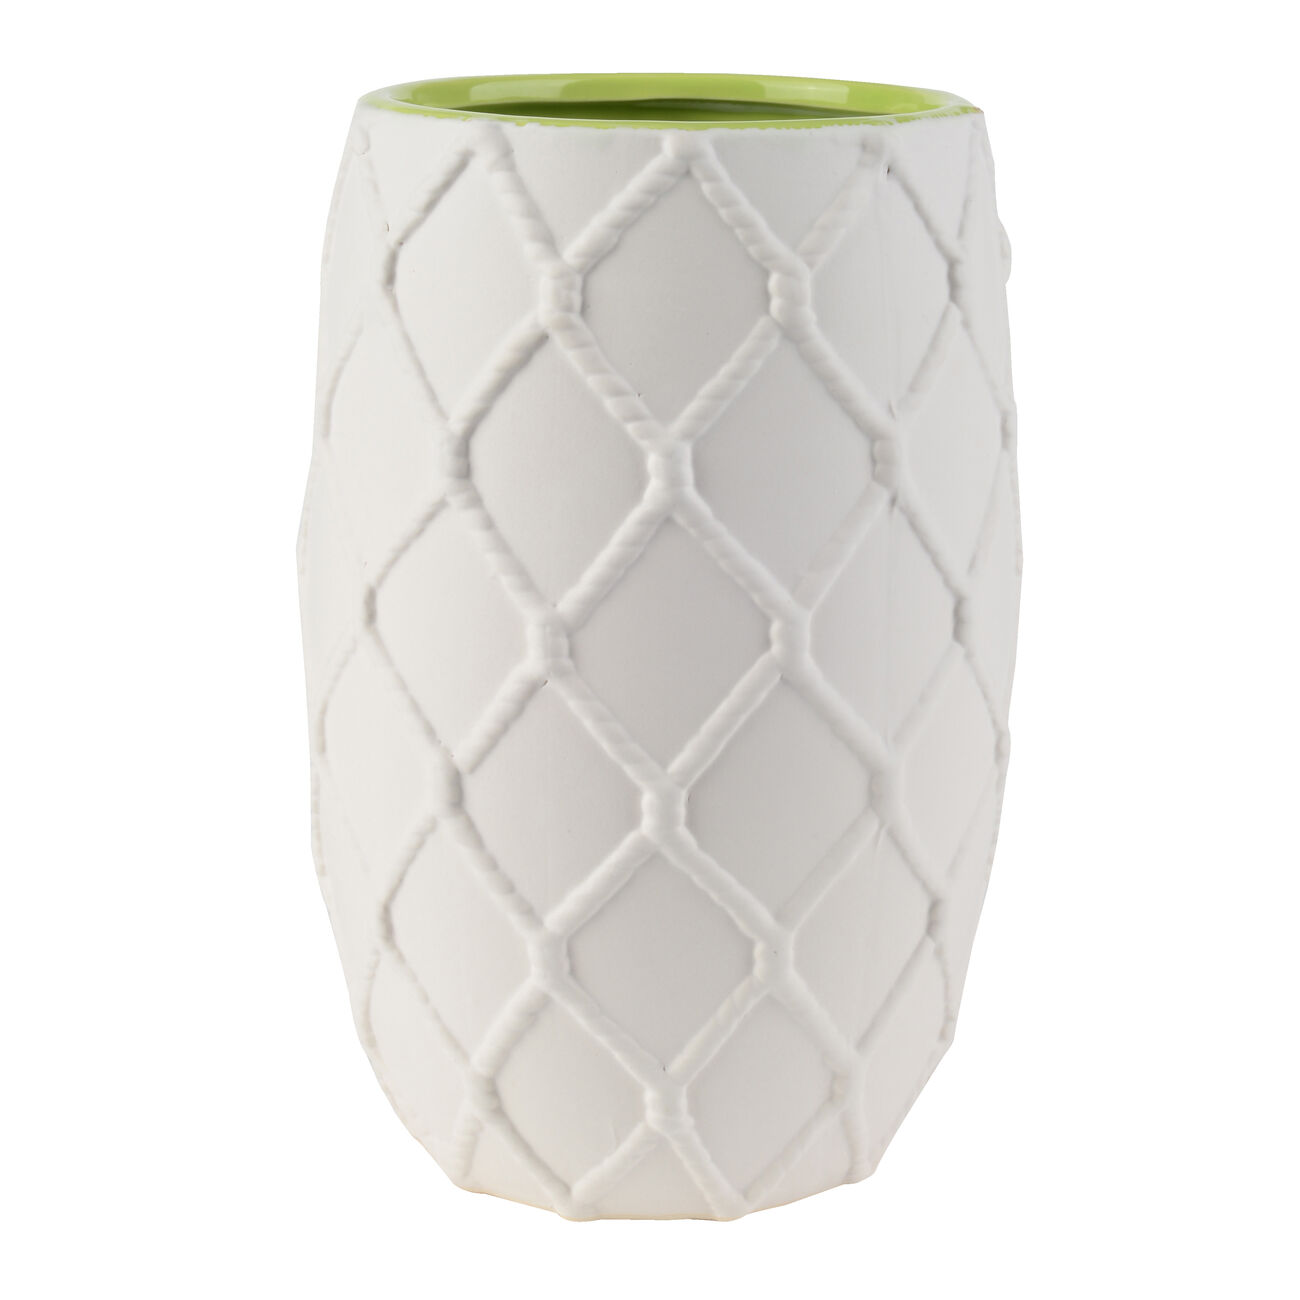 Ceramic Pot with Nautical Knot Texture Details, White and Green